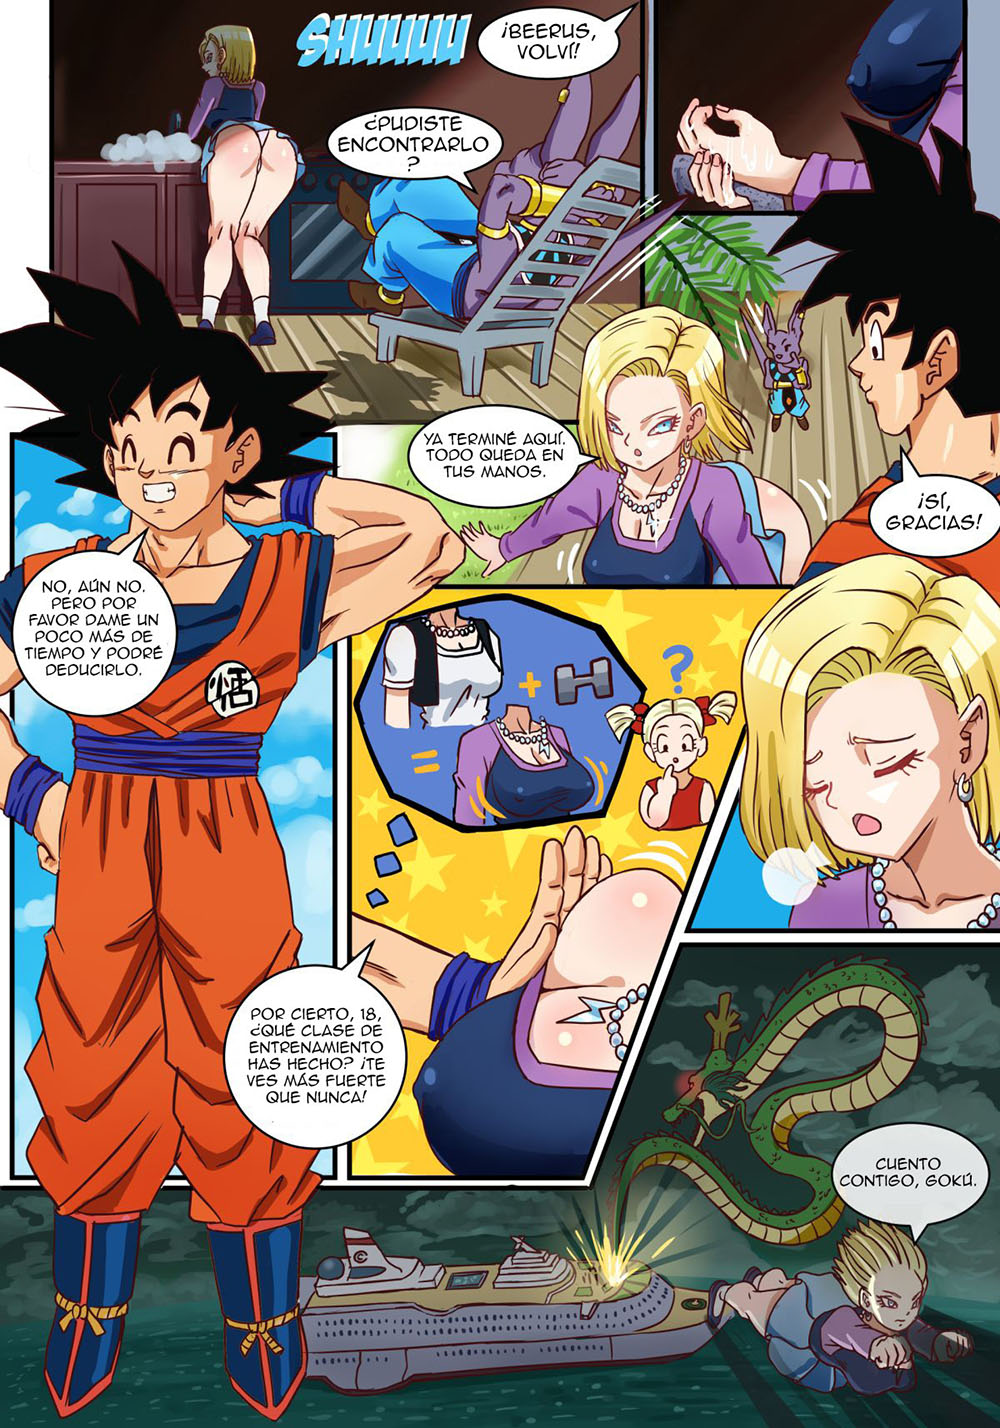 ANDROID 18 The Goddess Wife